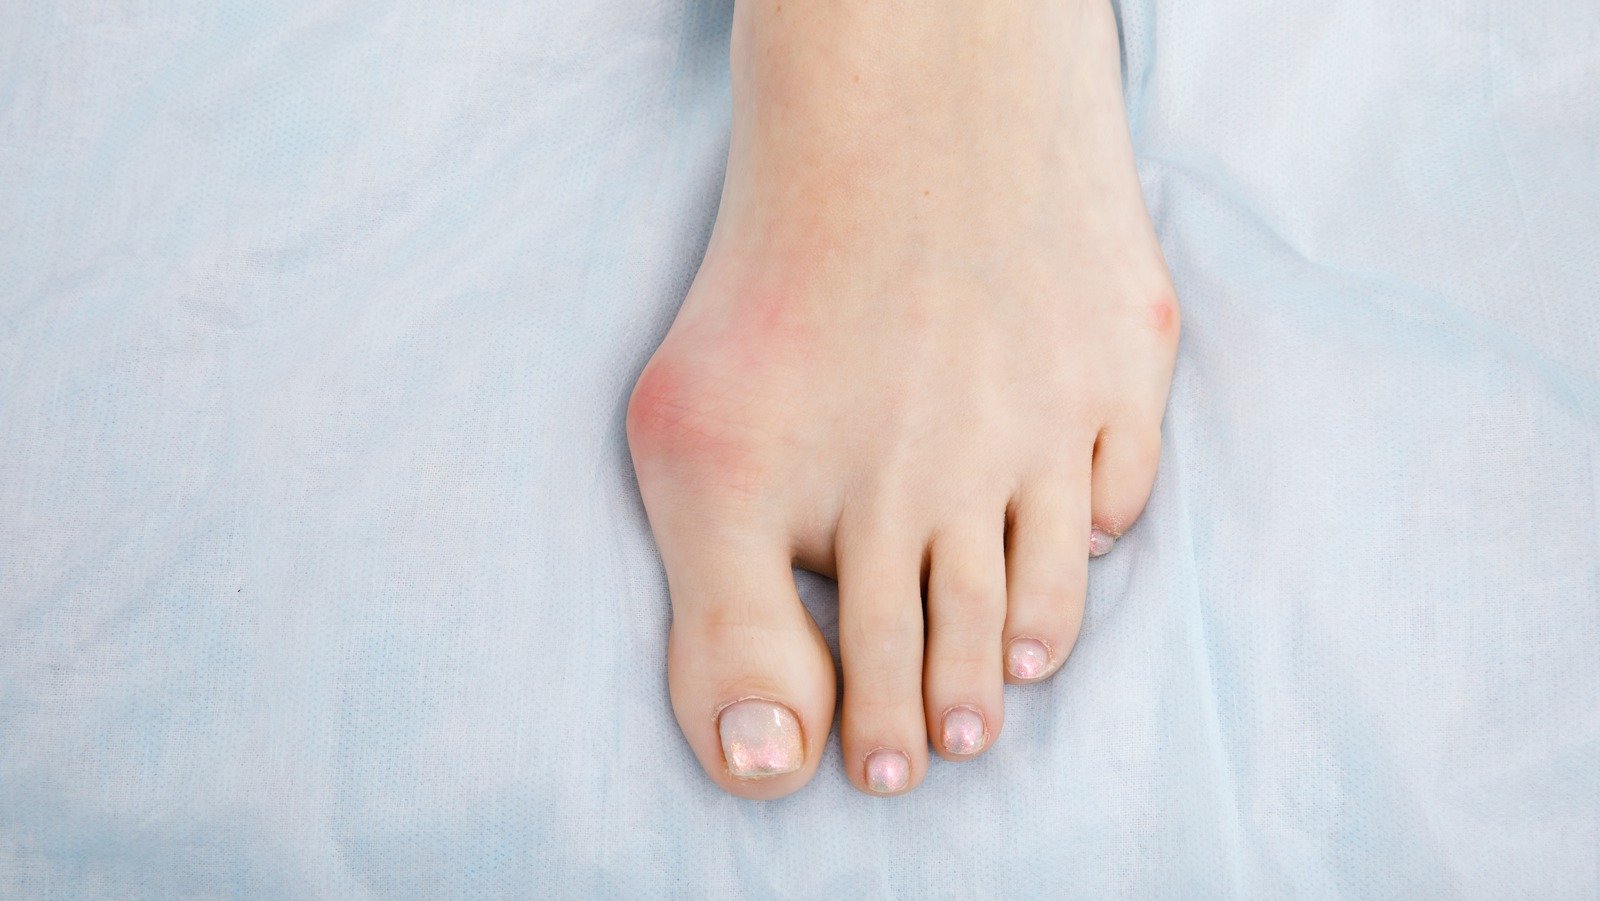 Ways To Treat Bunions At Home So You Don't Need Surgery - Glam